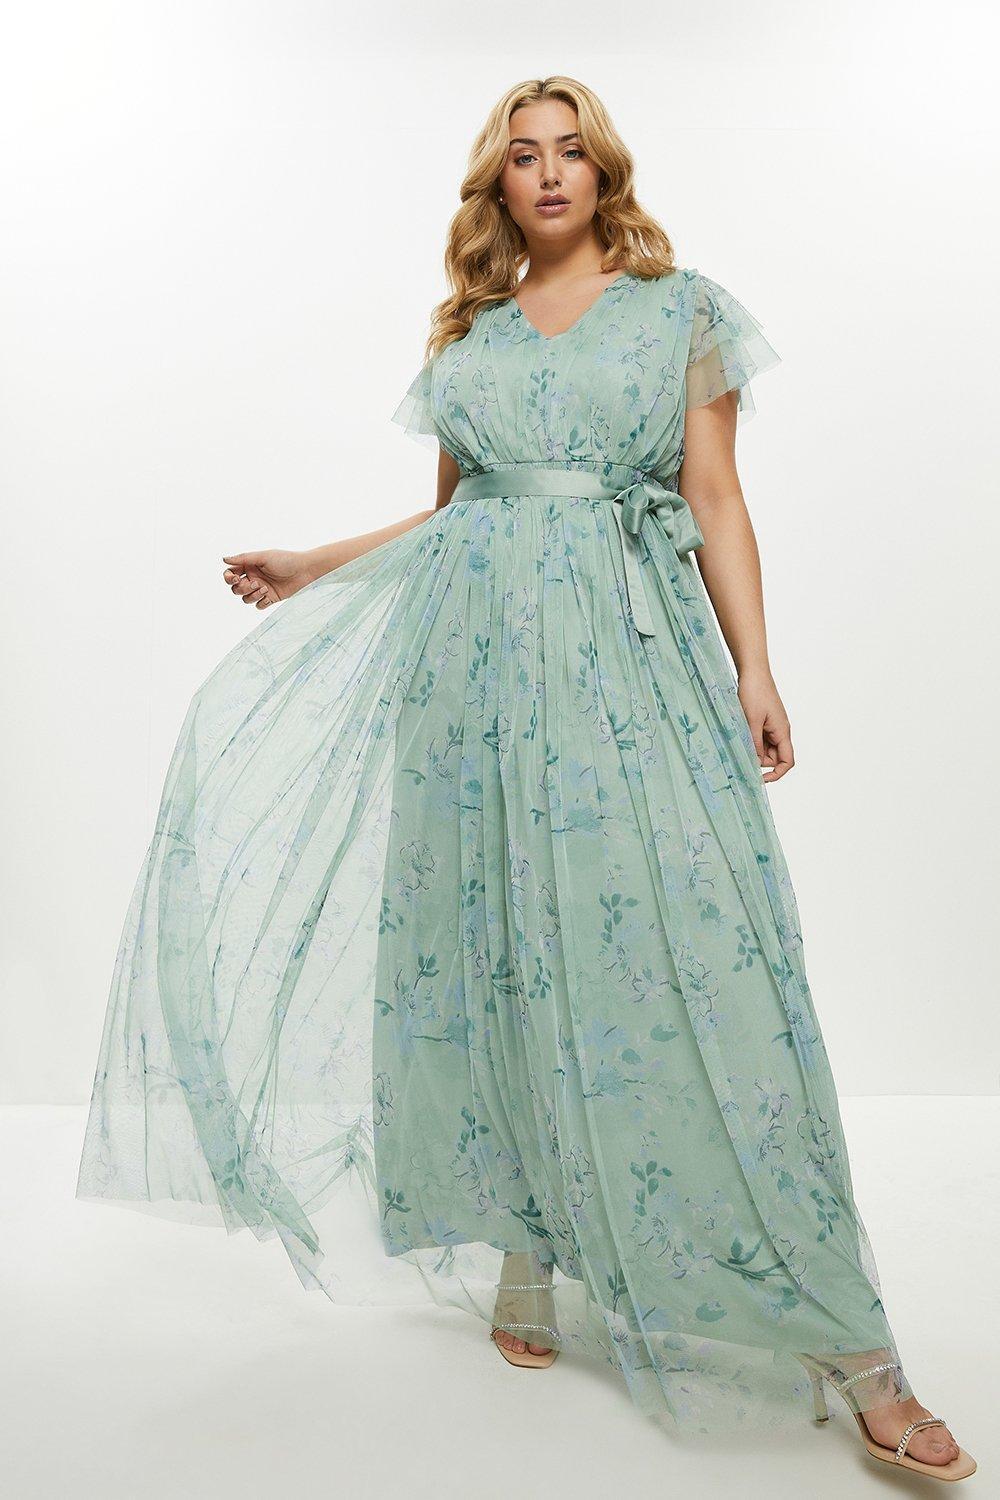 Behandle overvælde i gang The Best Plus Size Bridesmaid Dresses: 34 Gorgeous Gowns for Curves -  hitched.co.uk - hitched.co.uk